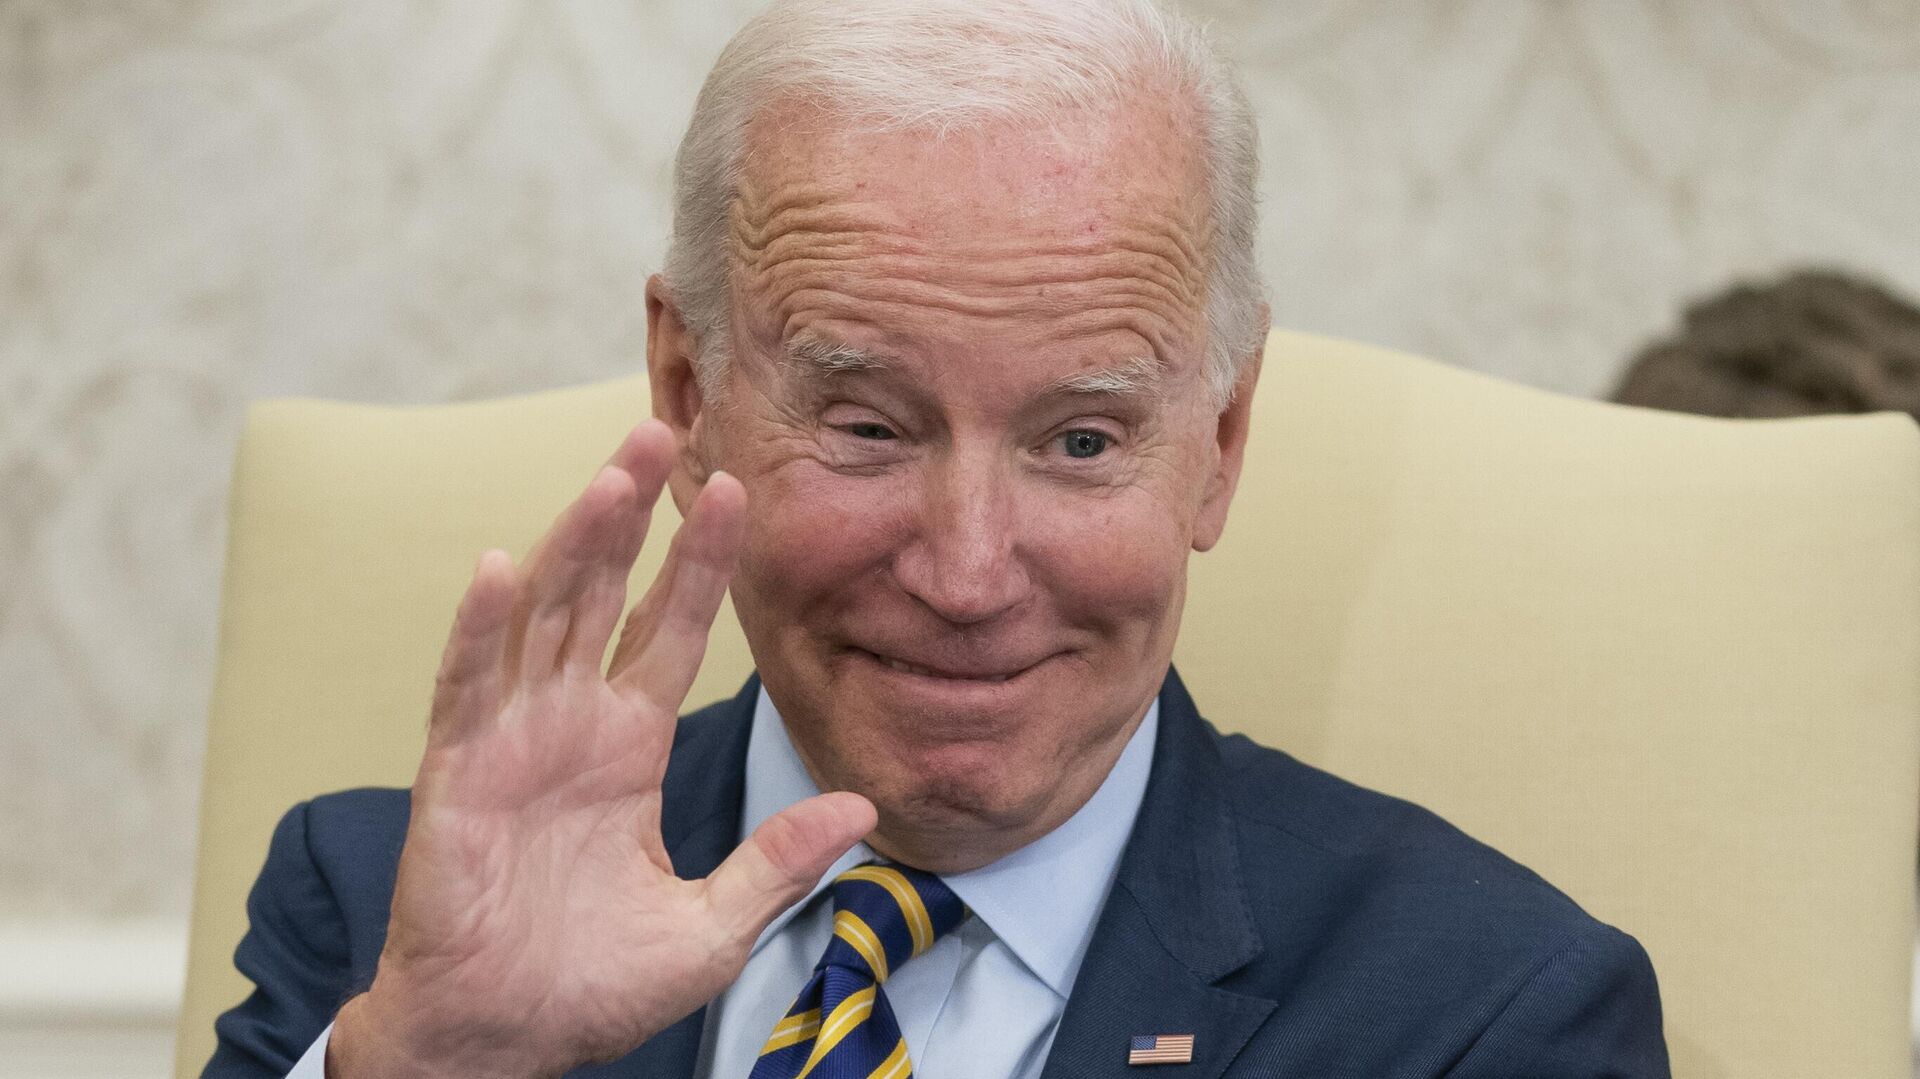 President Joe Biden waves during a meeting with South African President Cyril Ramaphosa in the Oval Office of the White House, Friday, Sept. 16, 2022, in Washington.  - Sputnik International, 1920, 13.05.2023